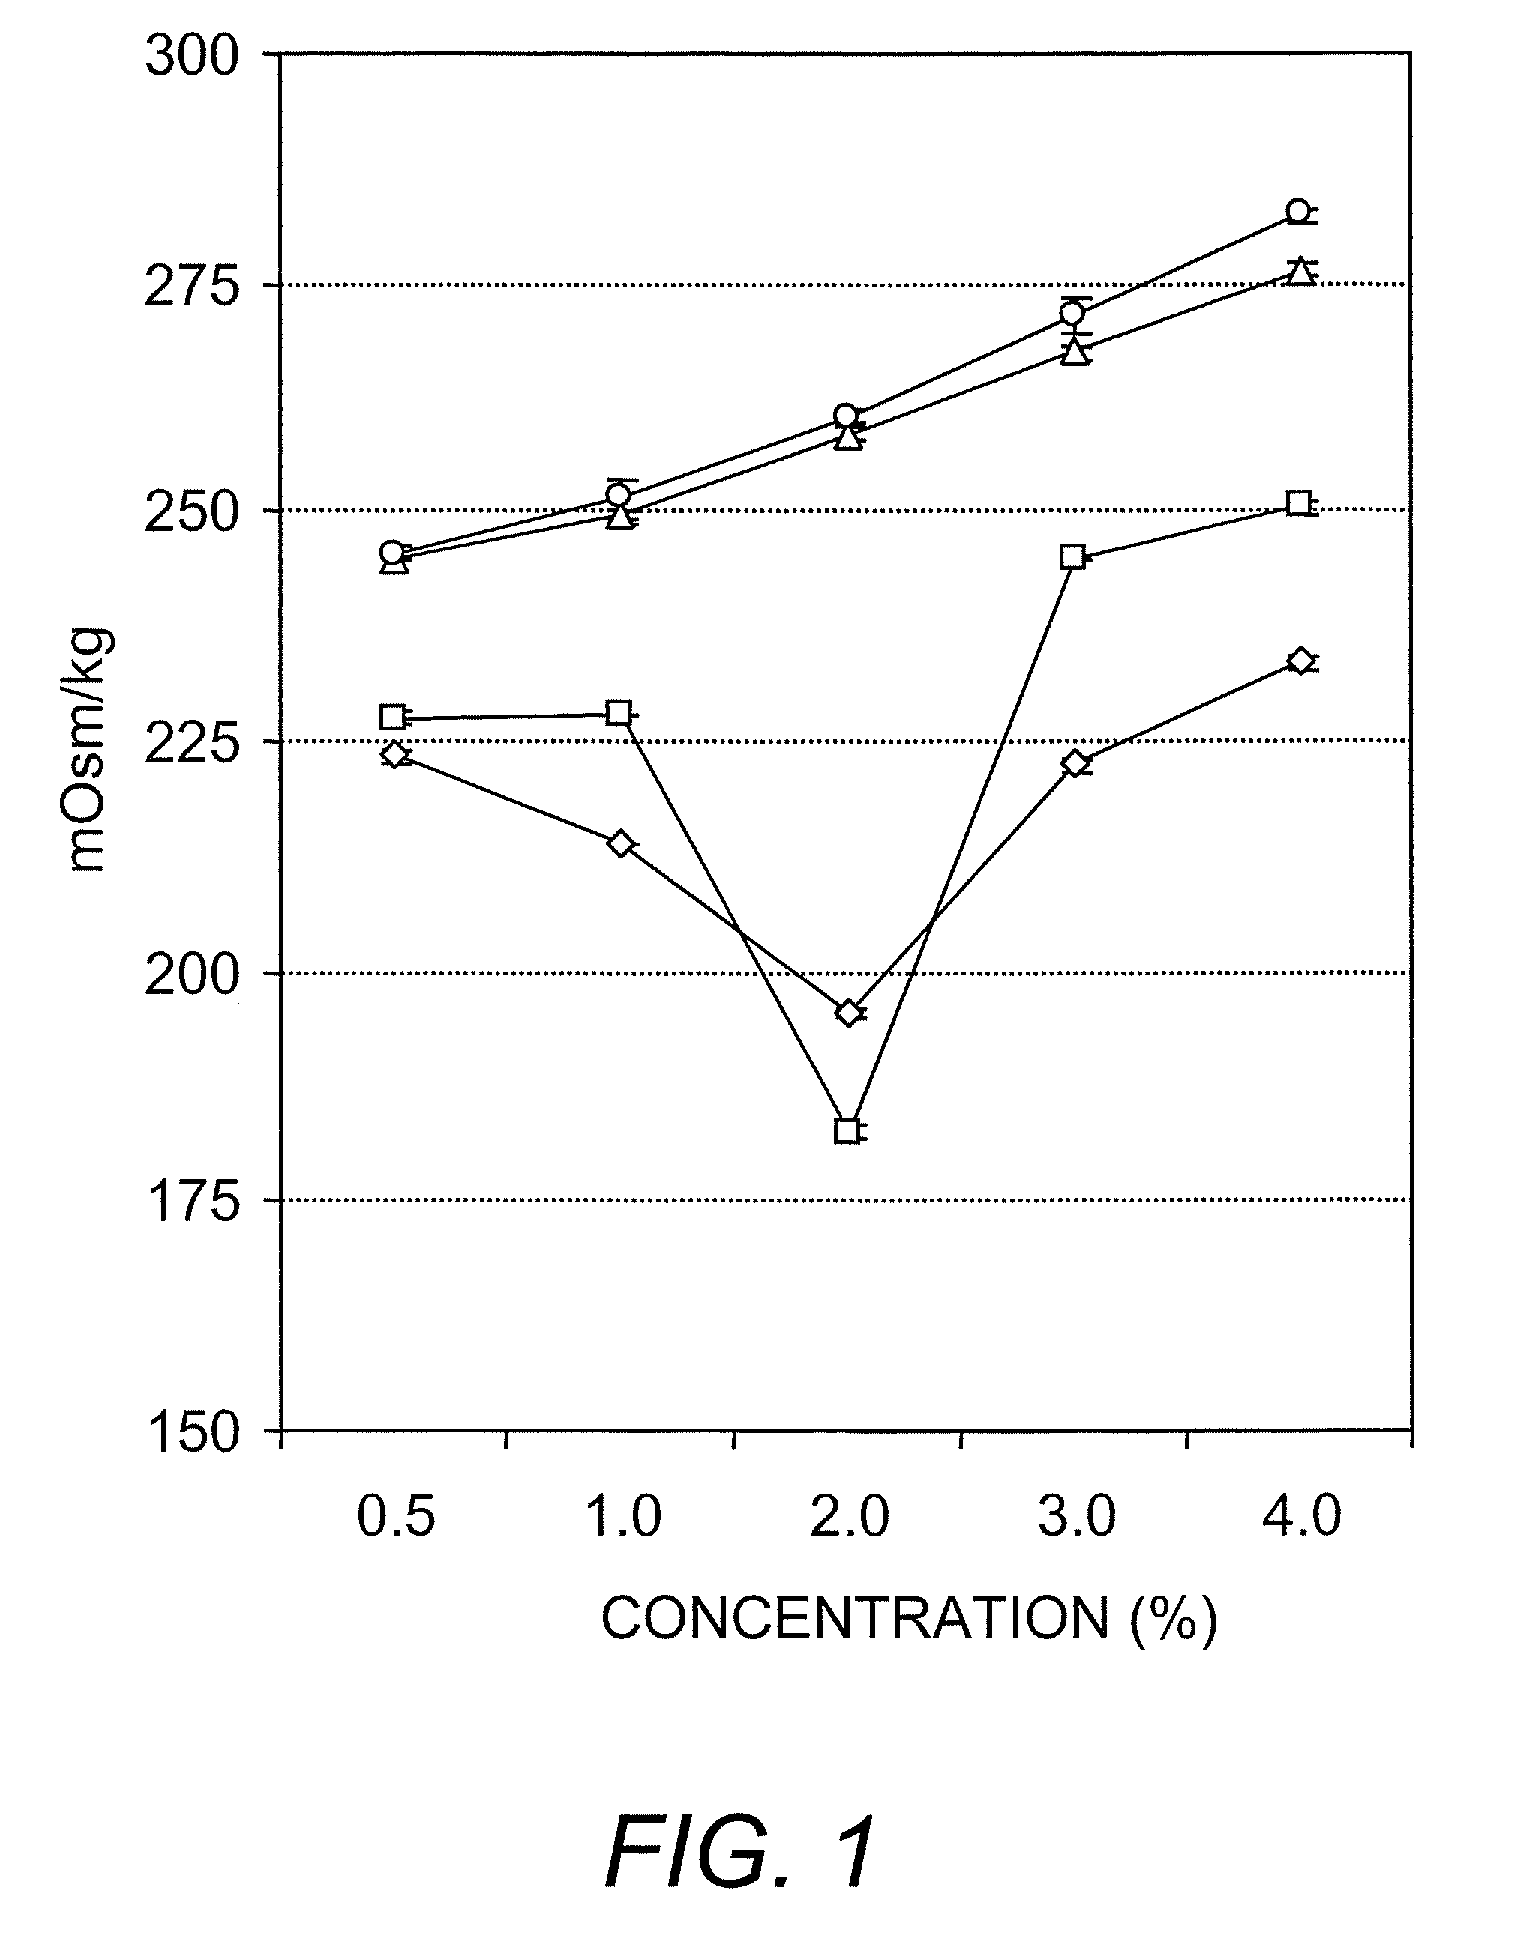 Ambient stored blood plasma expanders containing keratose